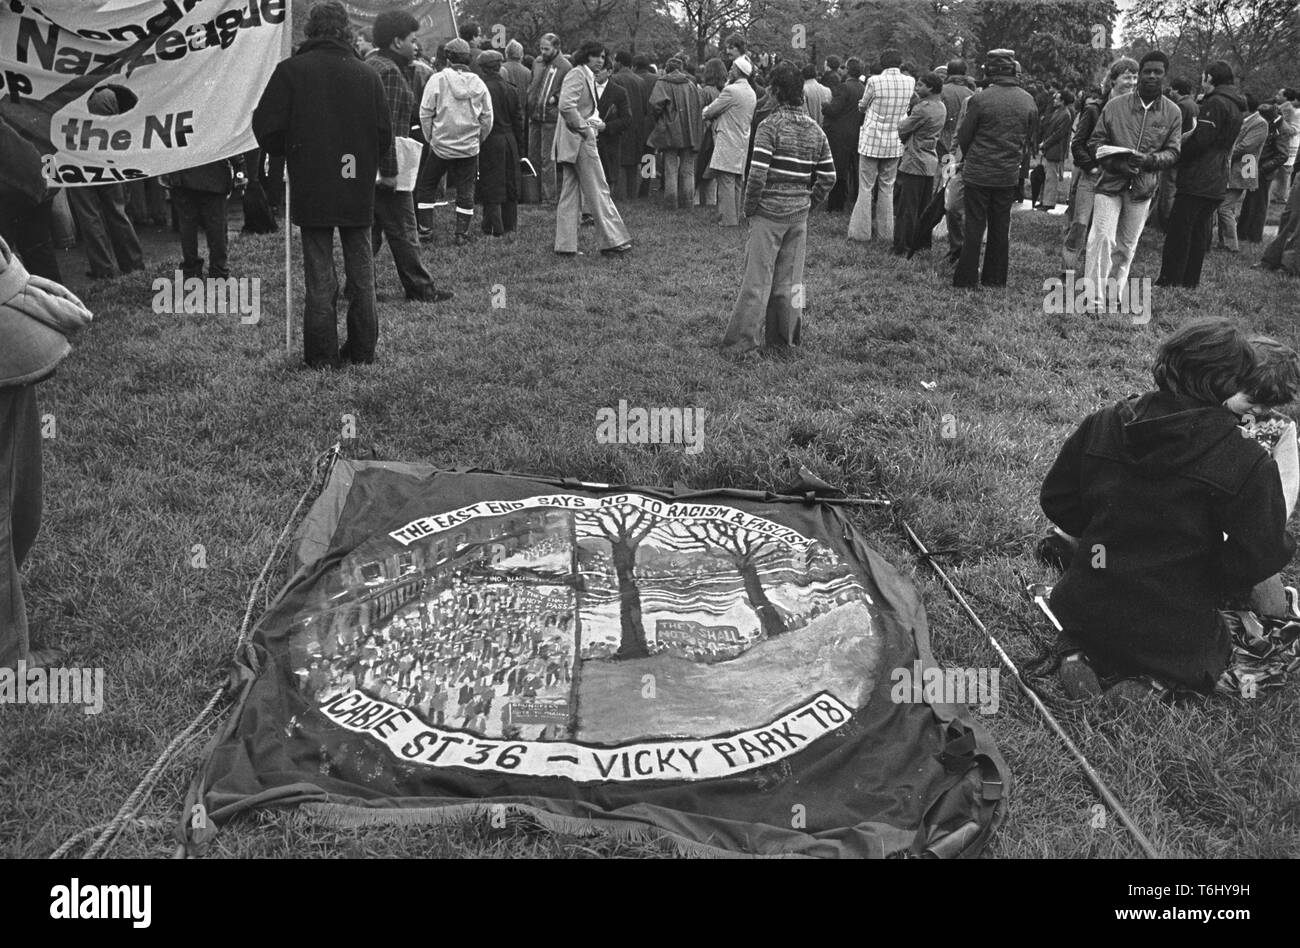 67/6  Tower Hamlets Whitechapel Altab Ali march 1978  'Itchy Park' later renamed Altab Ali Park Stock Photo